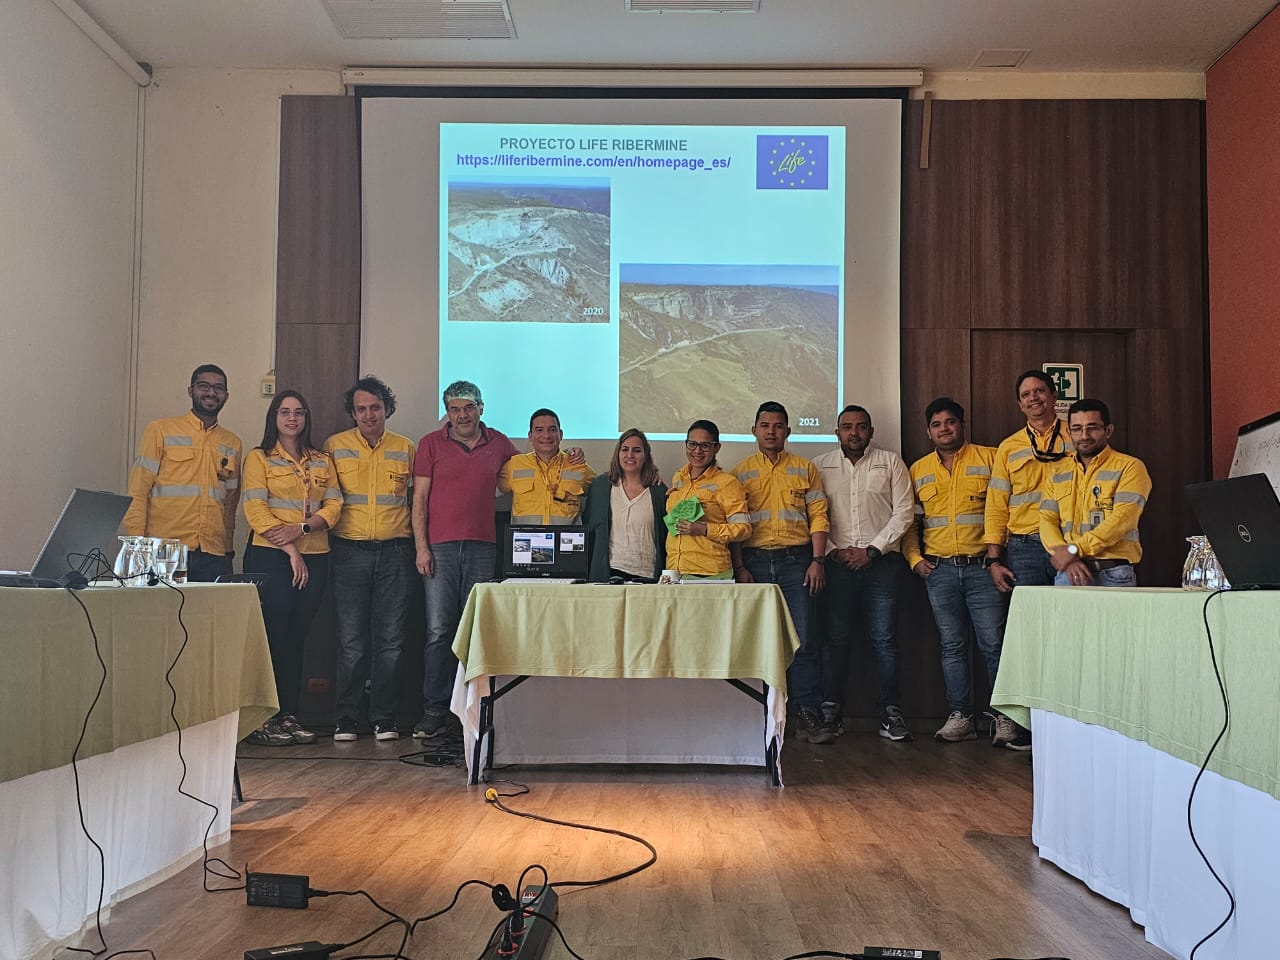 TRANSFER AND TRAINING: Training course in the largest coal mine in South America (La Guajira, Colombia).